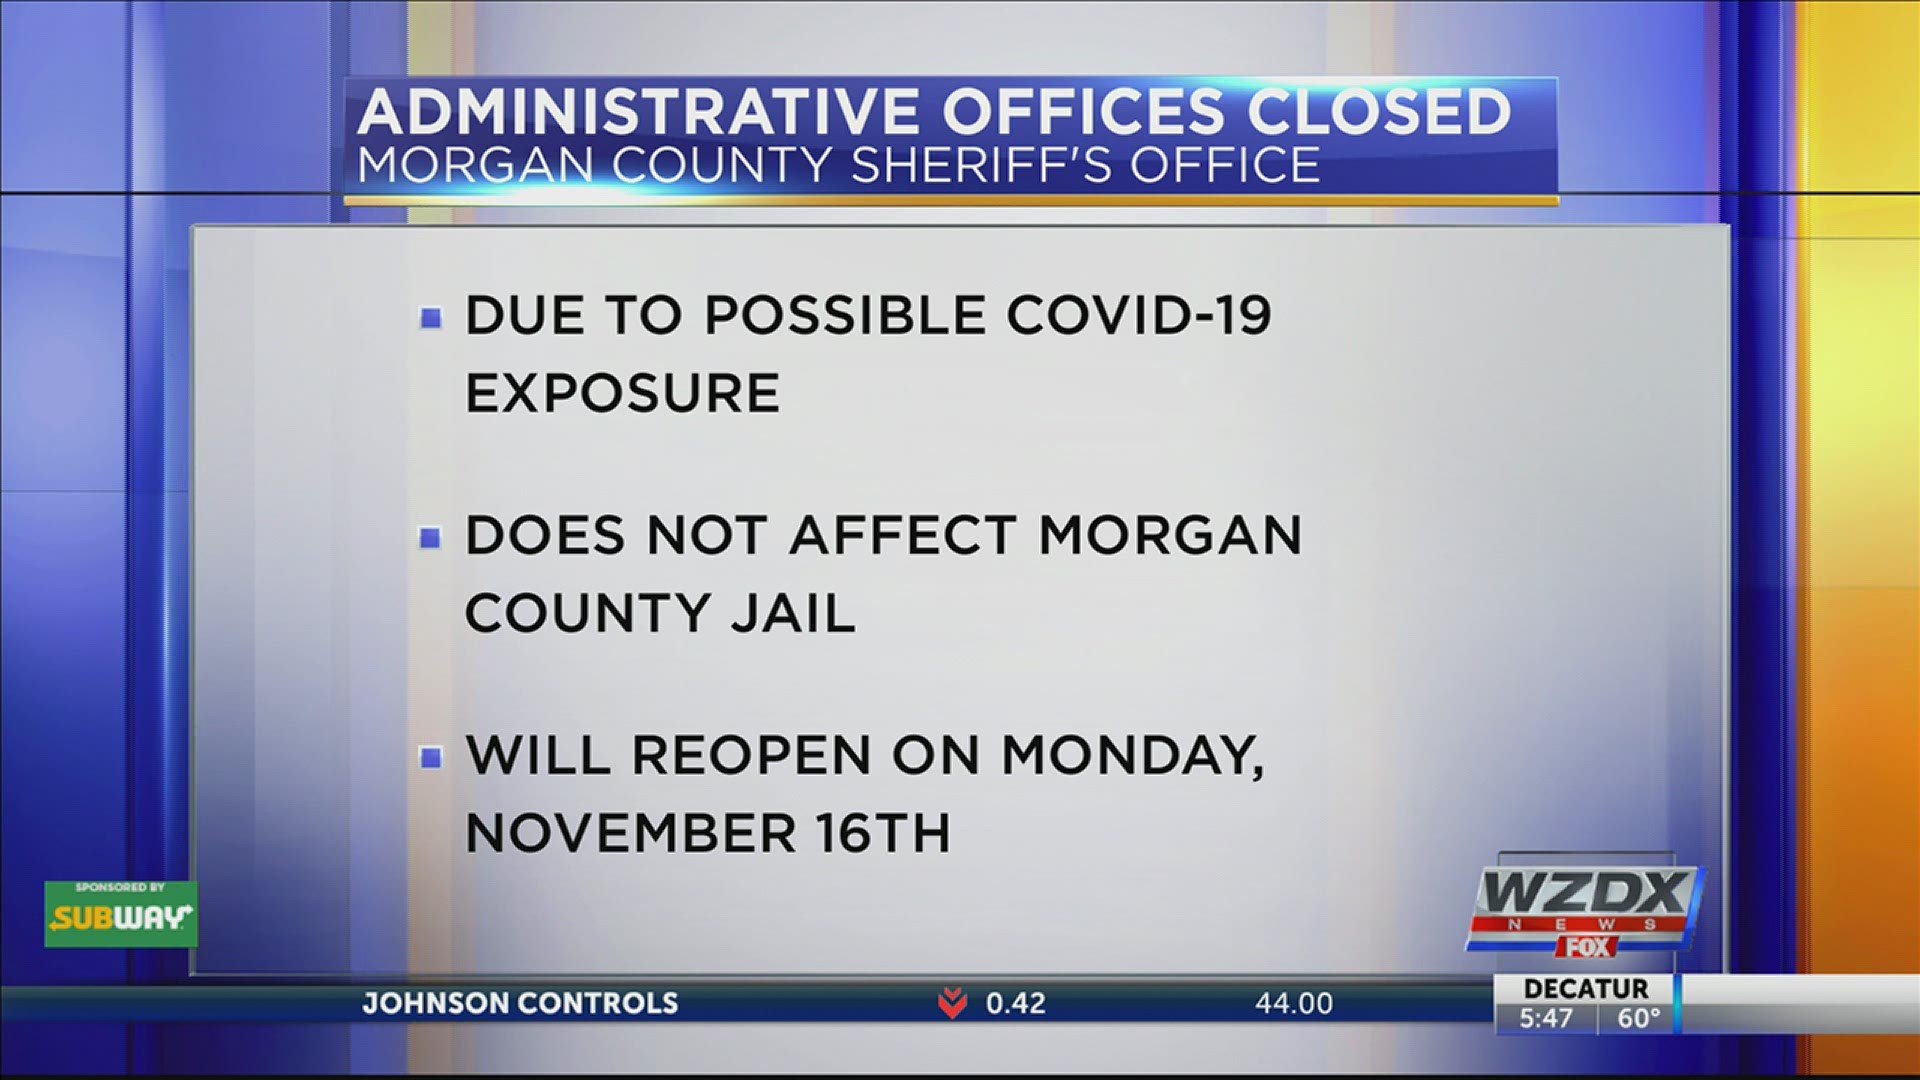 The sheriff's office said these closures will not affect the Morgan County Jail and jail staff will continue non-contact protocols, screening and disinfecting.